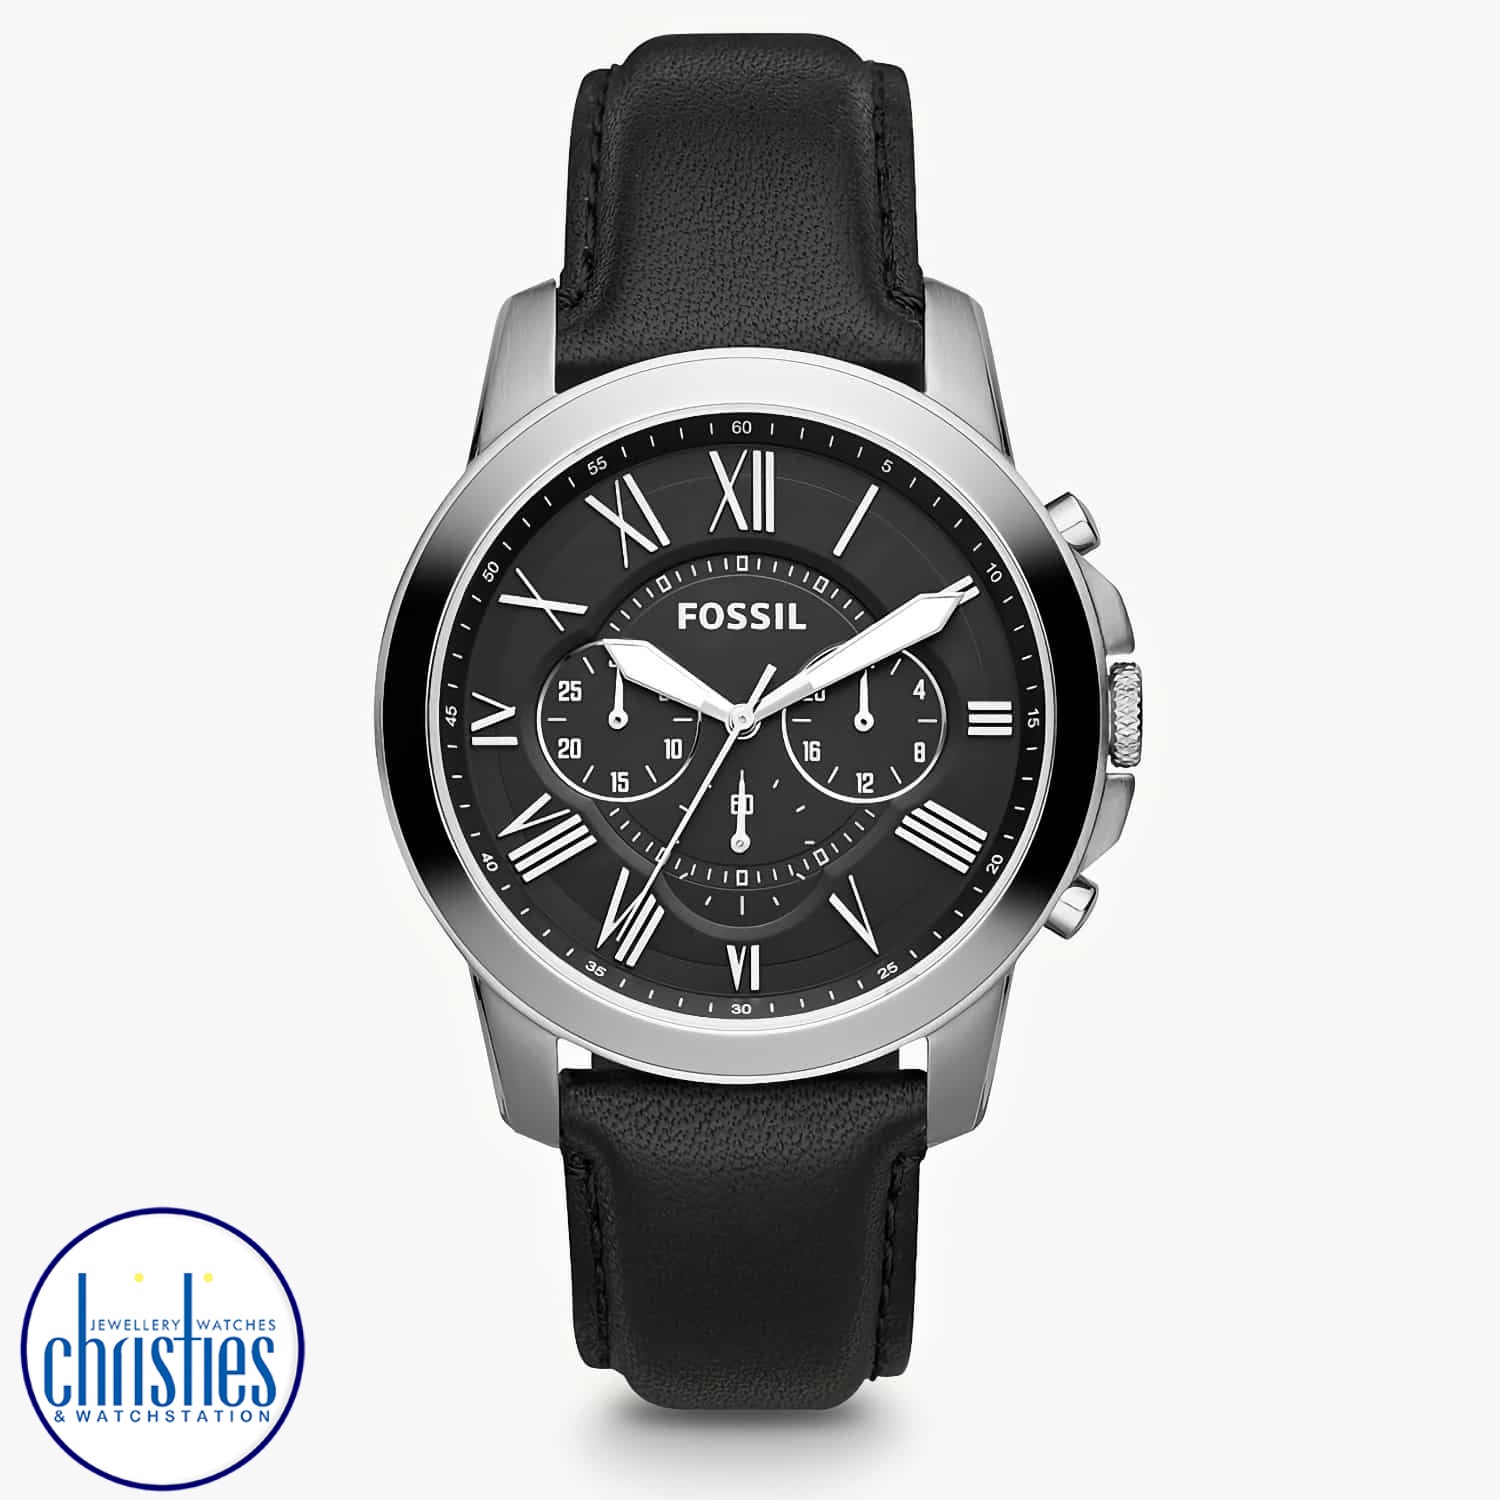 FS4812IE Fossil Grant Chronograph Black Leather Watch. FS4812IE Fossil Grant Chronograph Black Leather Watch Afterpay - Split your purchase into 4 instalments - Pay for your purchase over 4 instalments, due every two weeks. You’ll pay your first installme